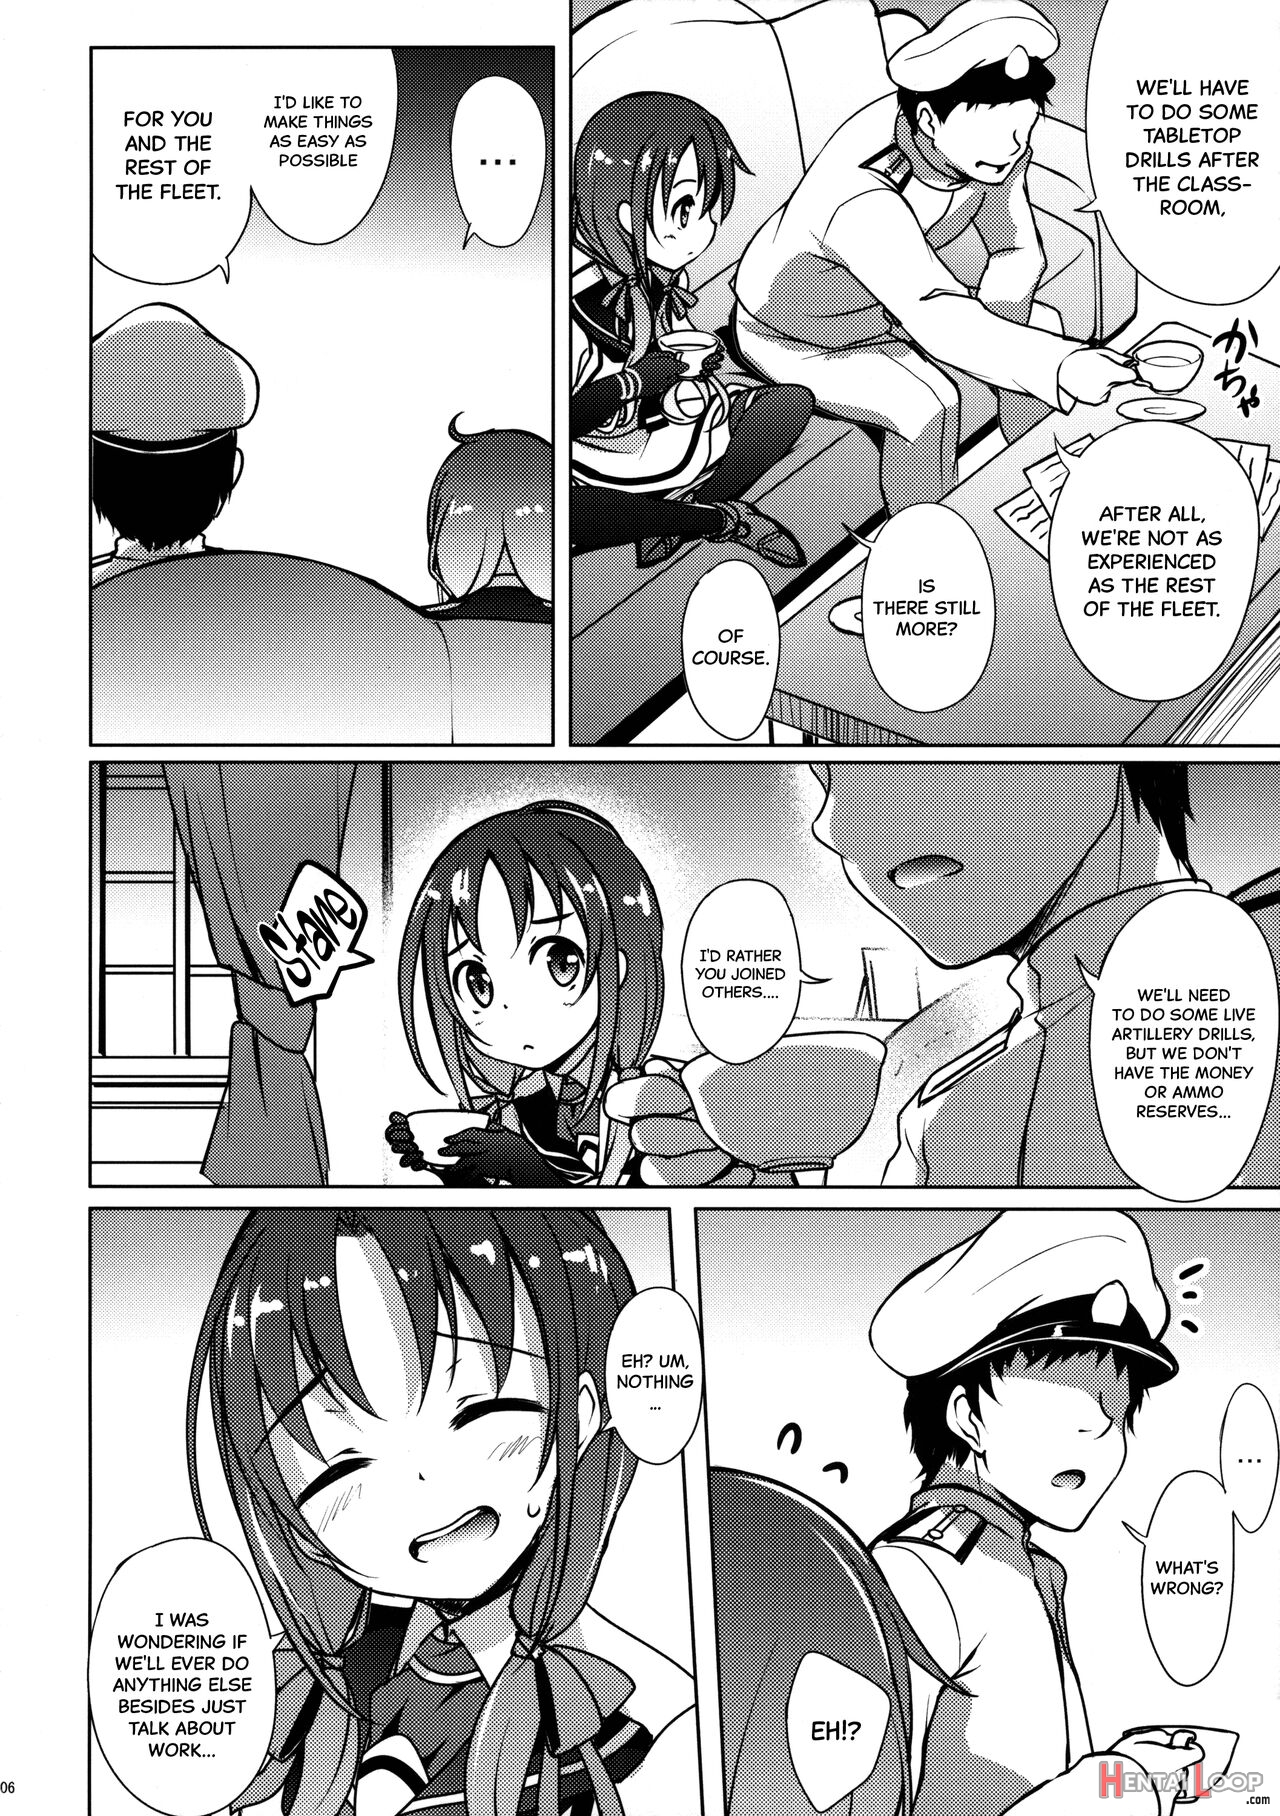 A Nice Day For Some Suzukaze page 5